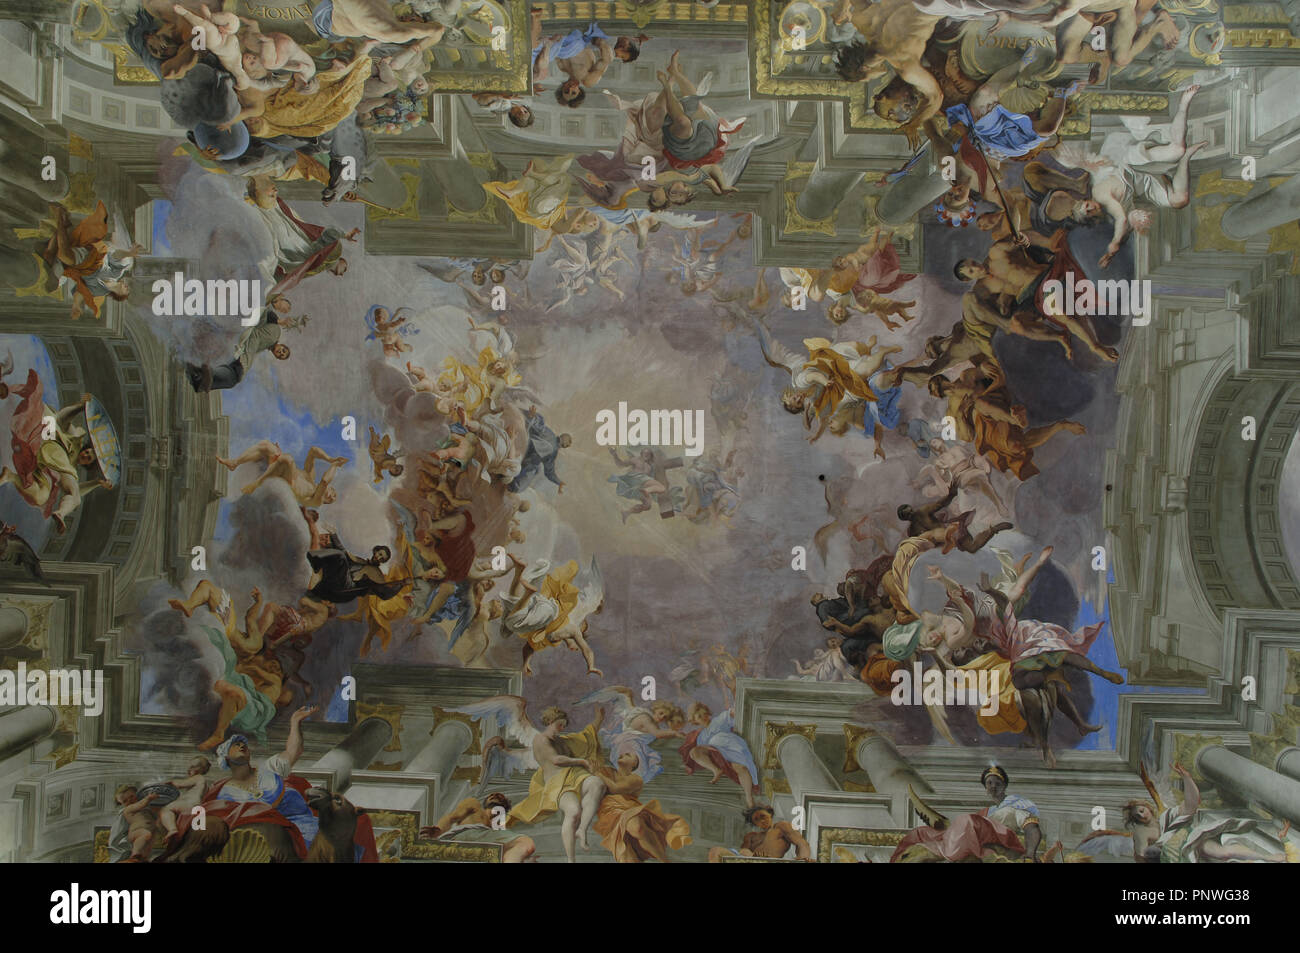 Italy. Rome. The Church of St. Ignatius of Loyola at Campus Martius. Trompe l'oeil ceiling fresco by Andrea Pozzo (1642-1709). The saint welcomed into paradise by Christ and the Virgin Mary and surrounded by allegorical representations of all four continents (after 1685). Stock Photo